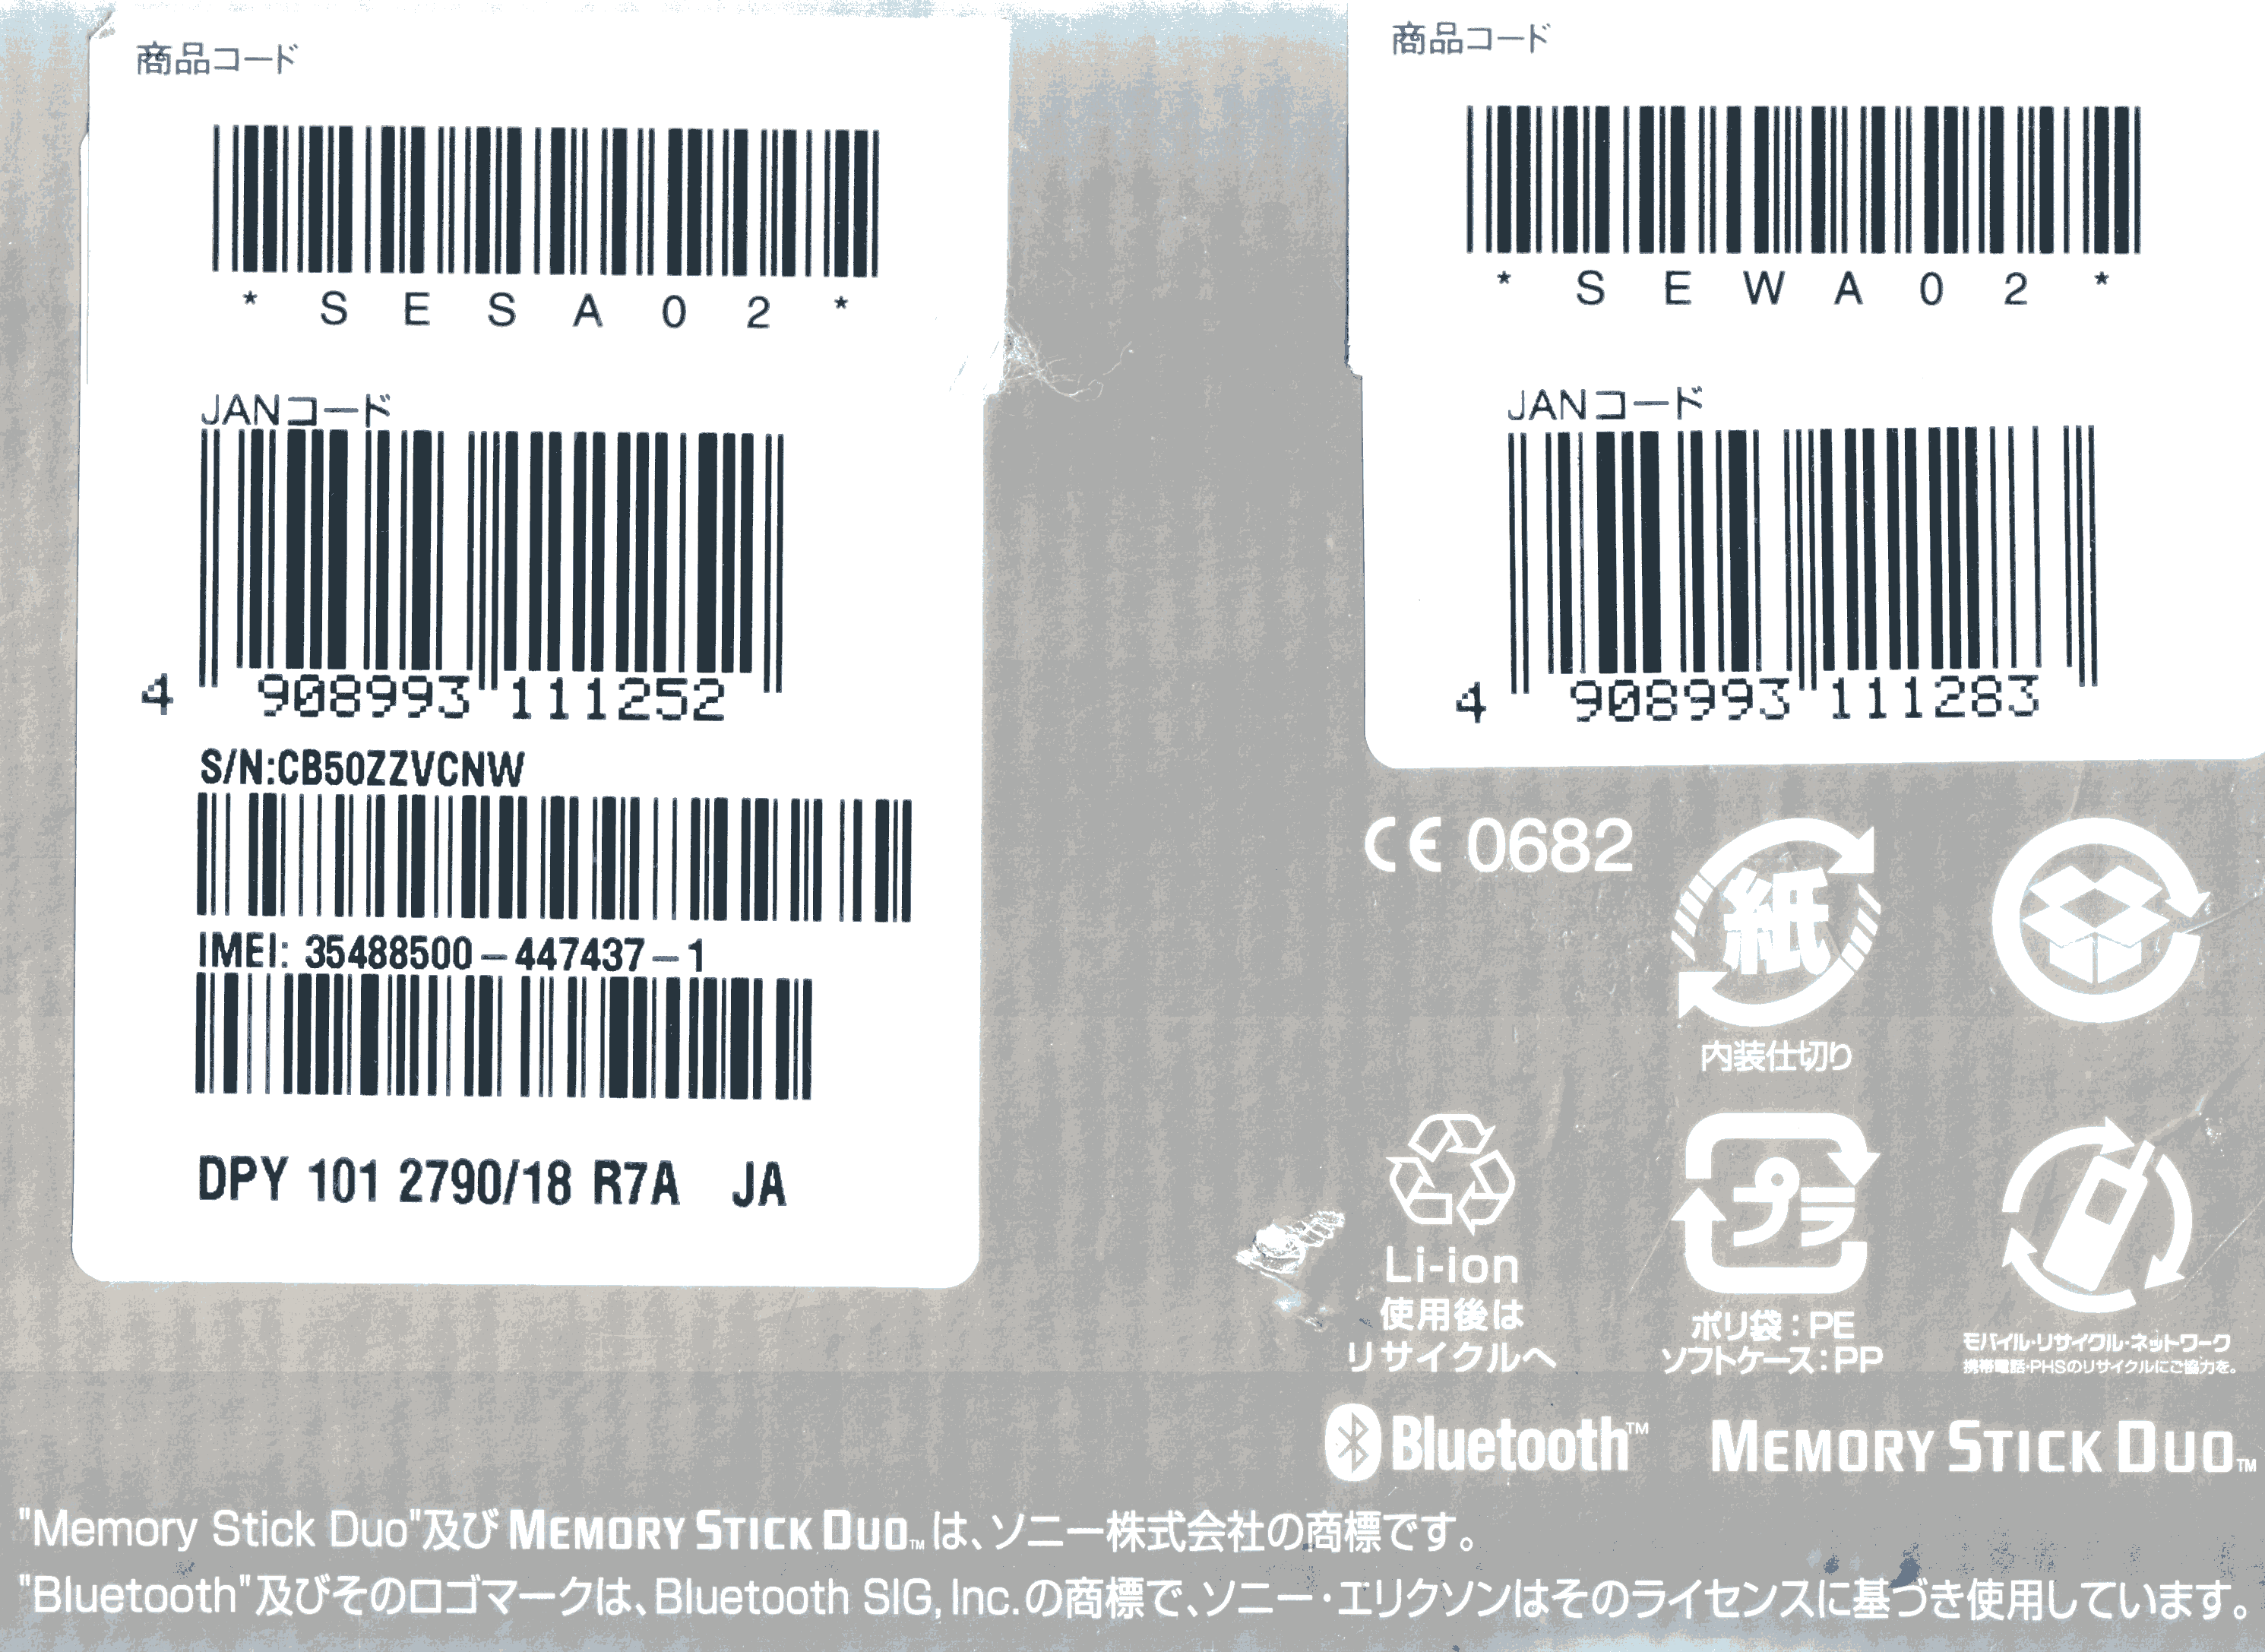 Vodafone 802SE label with two JAN codes